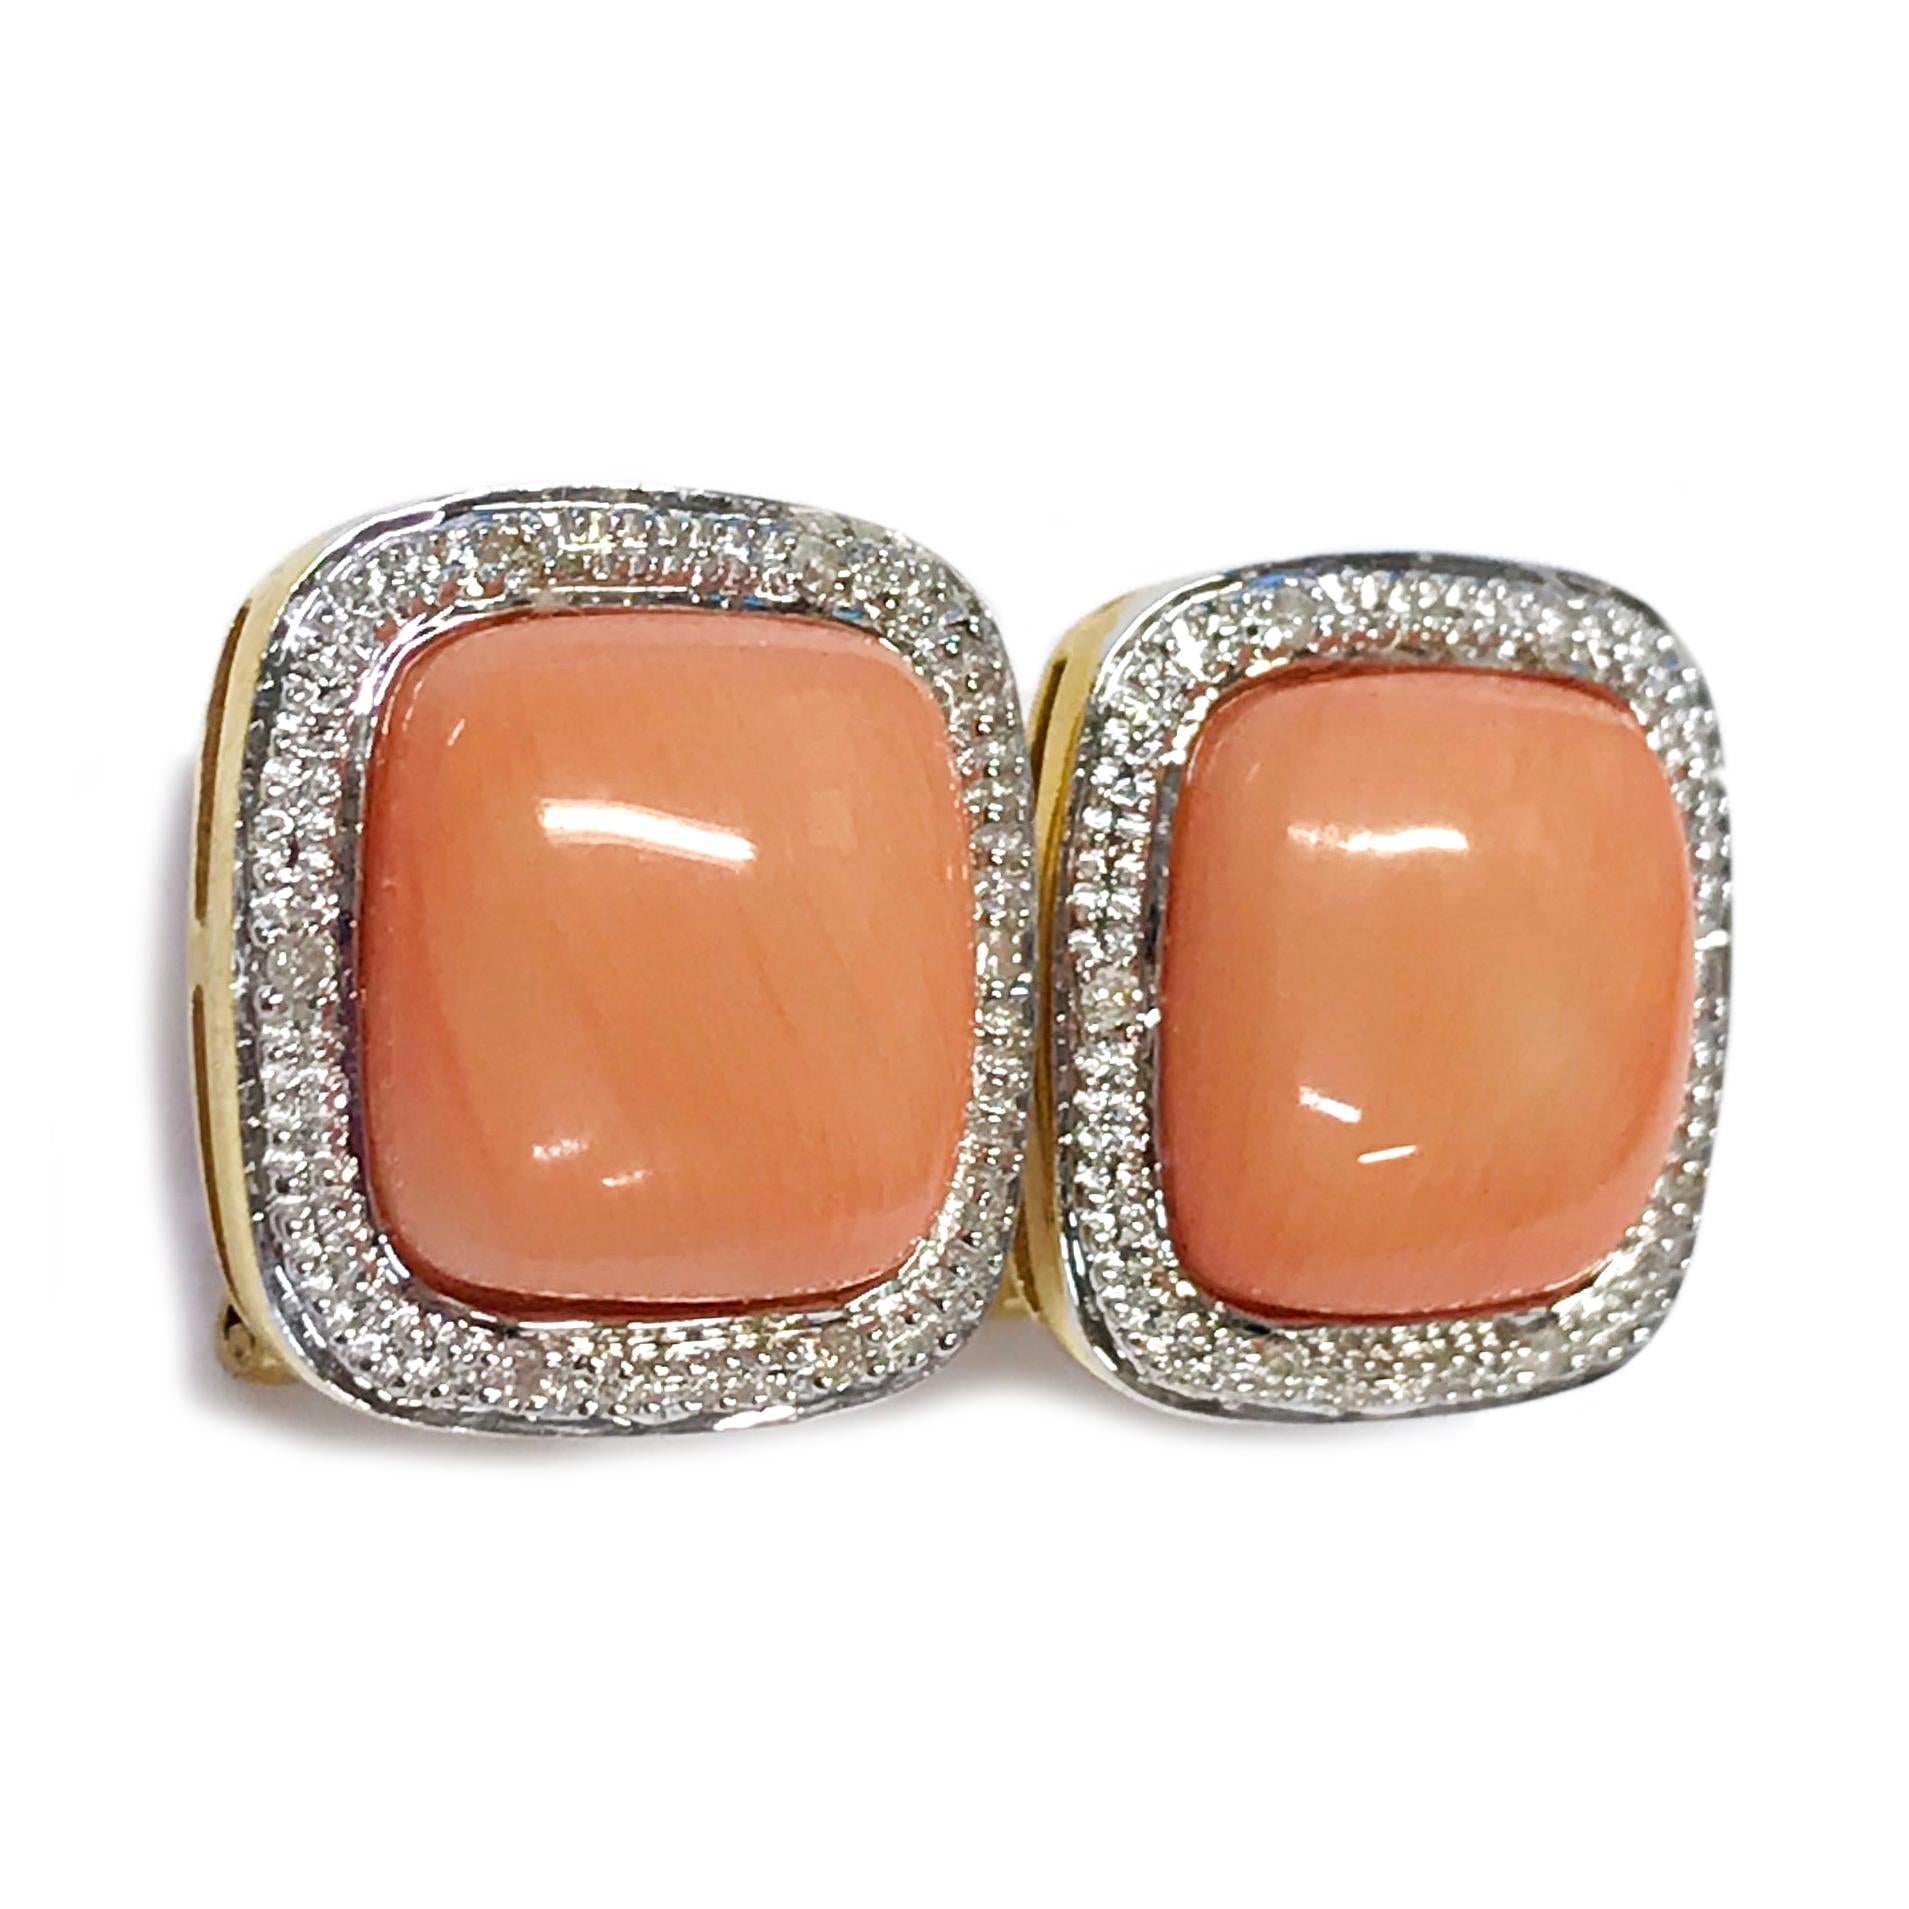 14 Karat Yellow Gold Pink Coral Diamond Earrings. The earrings feature a rounded corner square bezel-set Pink Coral cabochon with six round brilliant-cut diamonds along the surround of the earrings. The diamonds are set in white gold, two on either